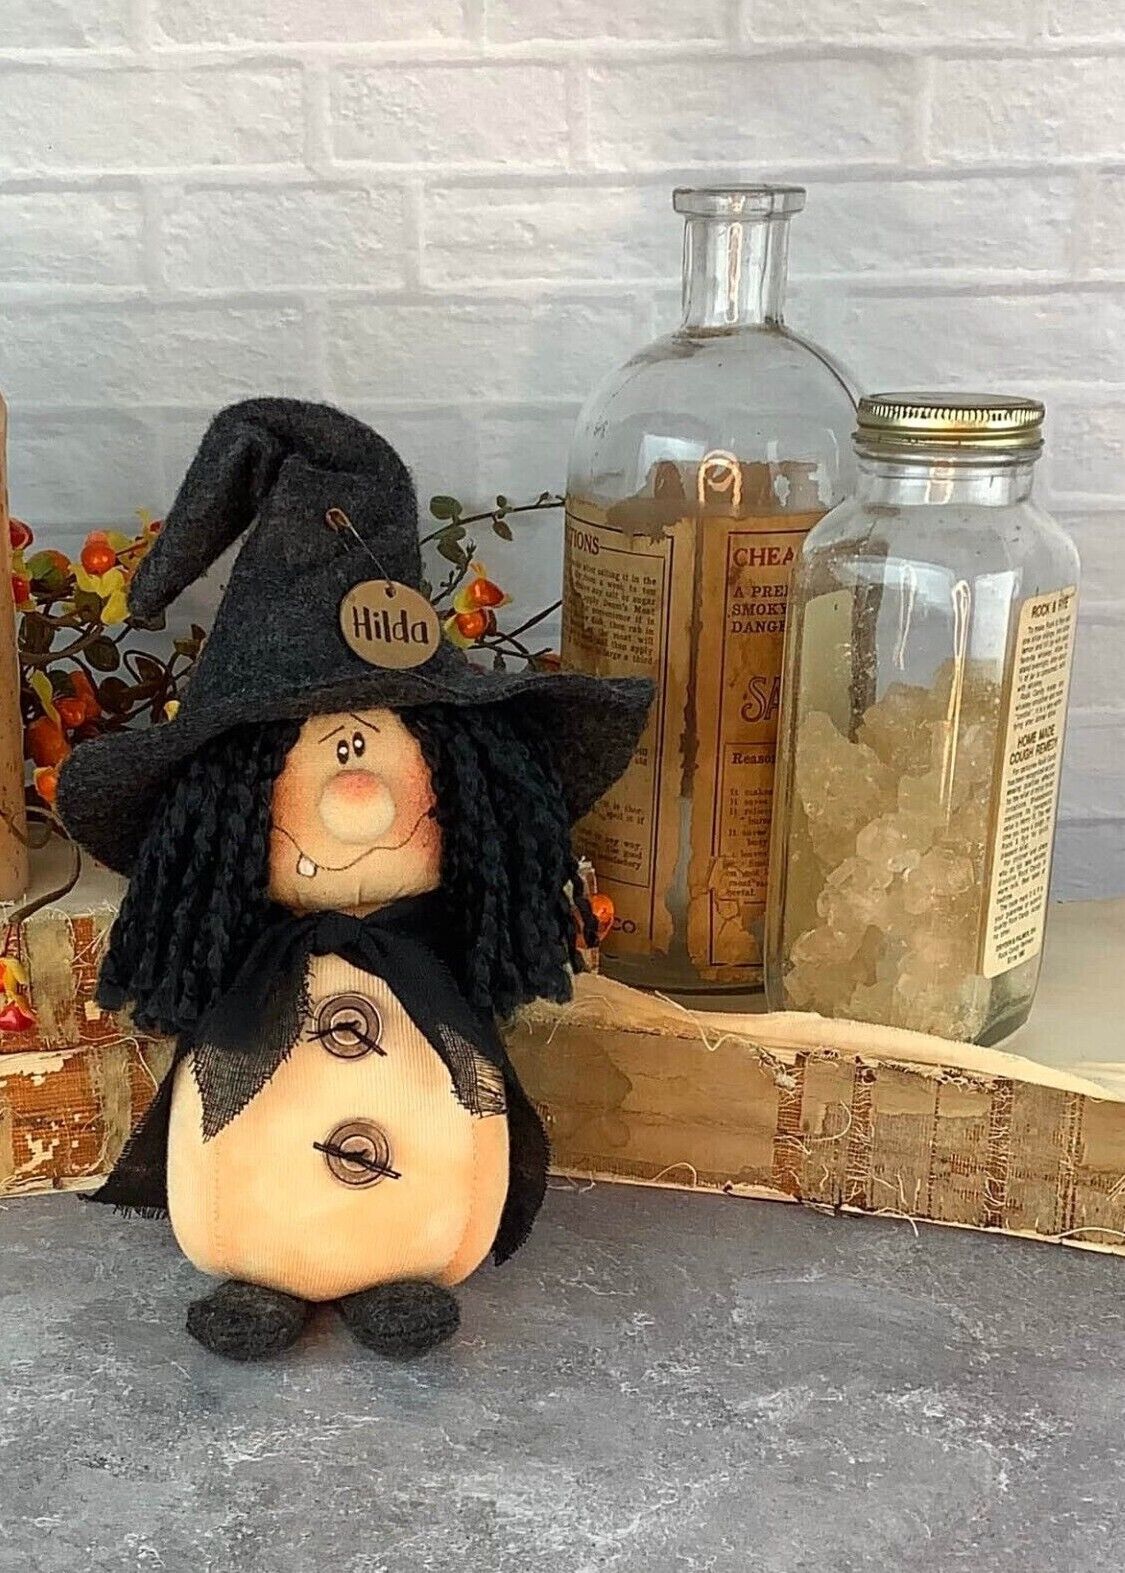 Honey and Me Halloween Hilda the Witch Doll F22132 - The Primitive Pineapple Collection